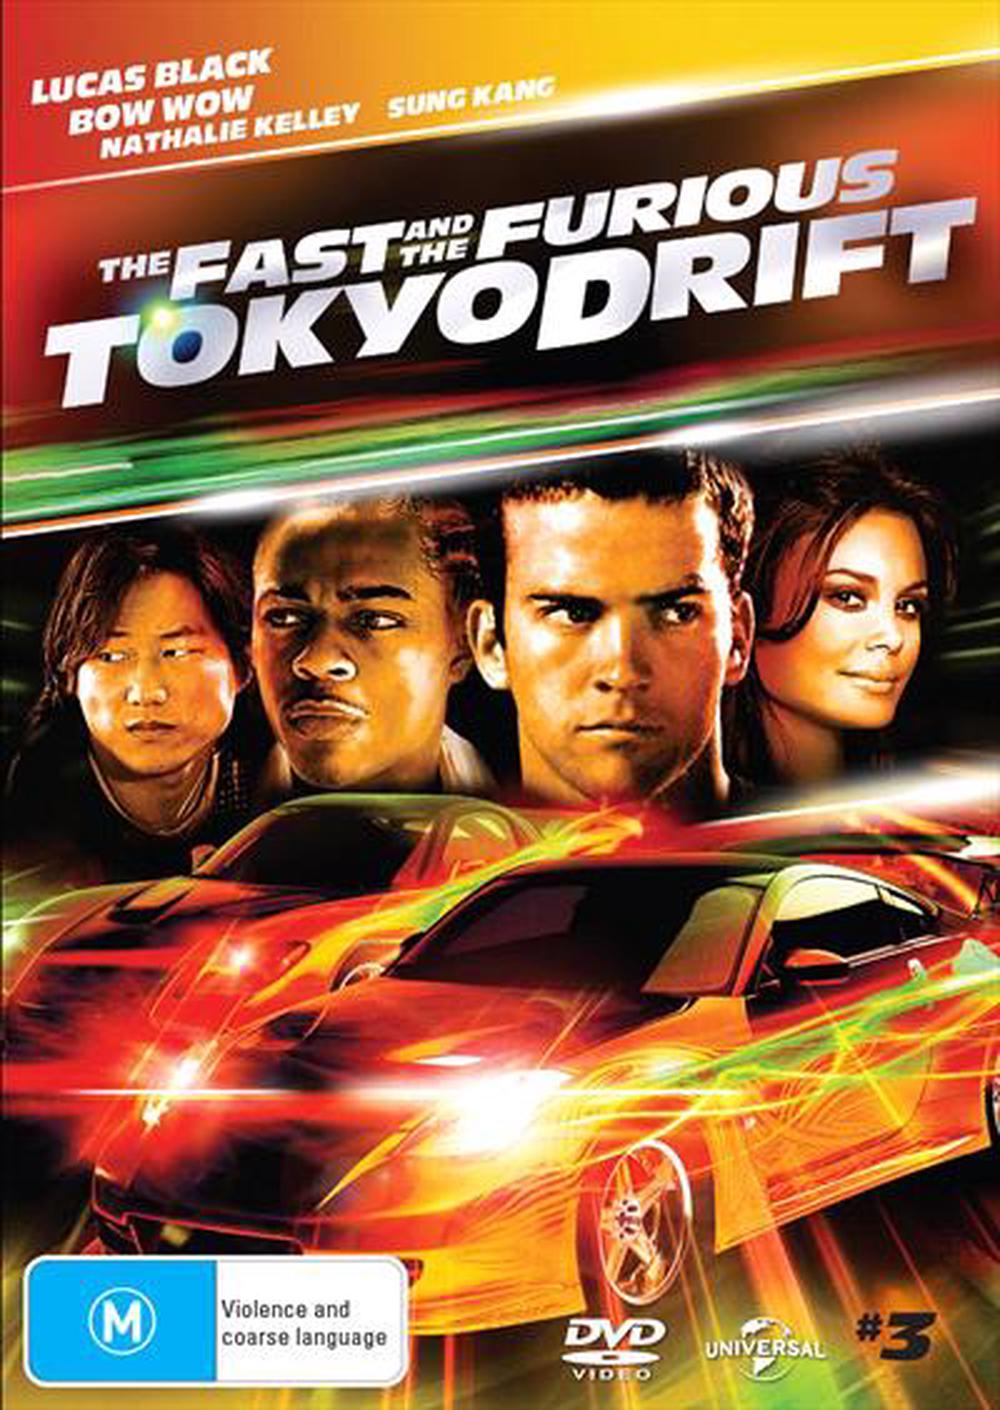 The Fast and the Furious: Tokyo Drift, DVD | Buy online at The Nile